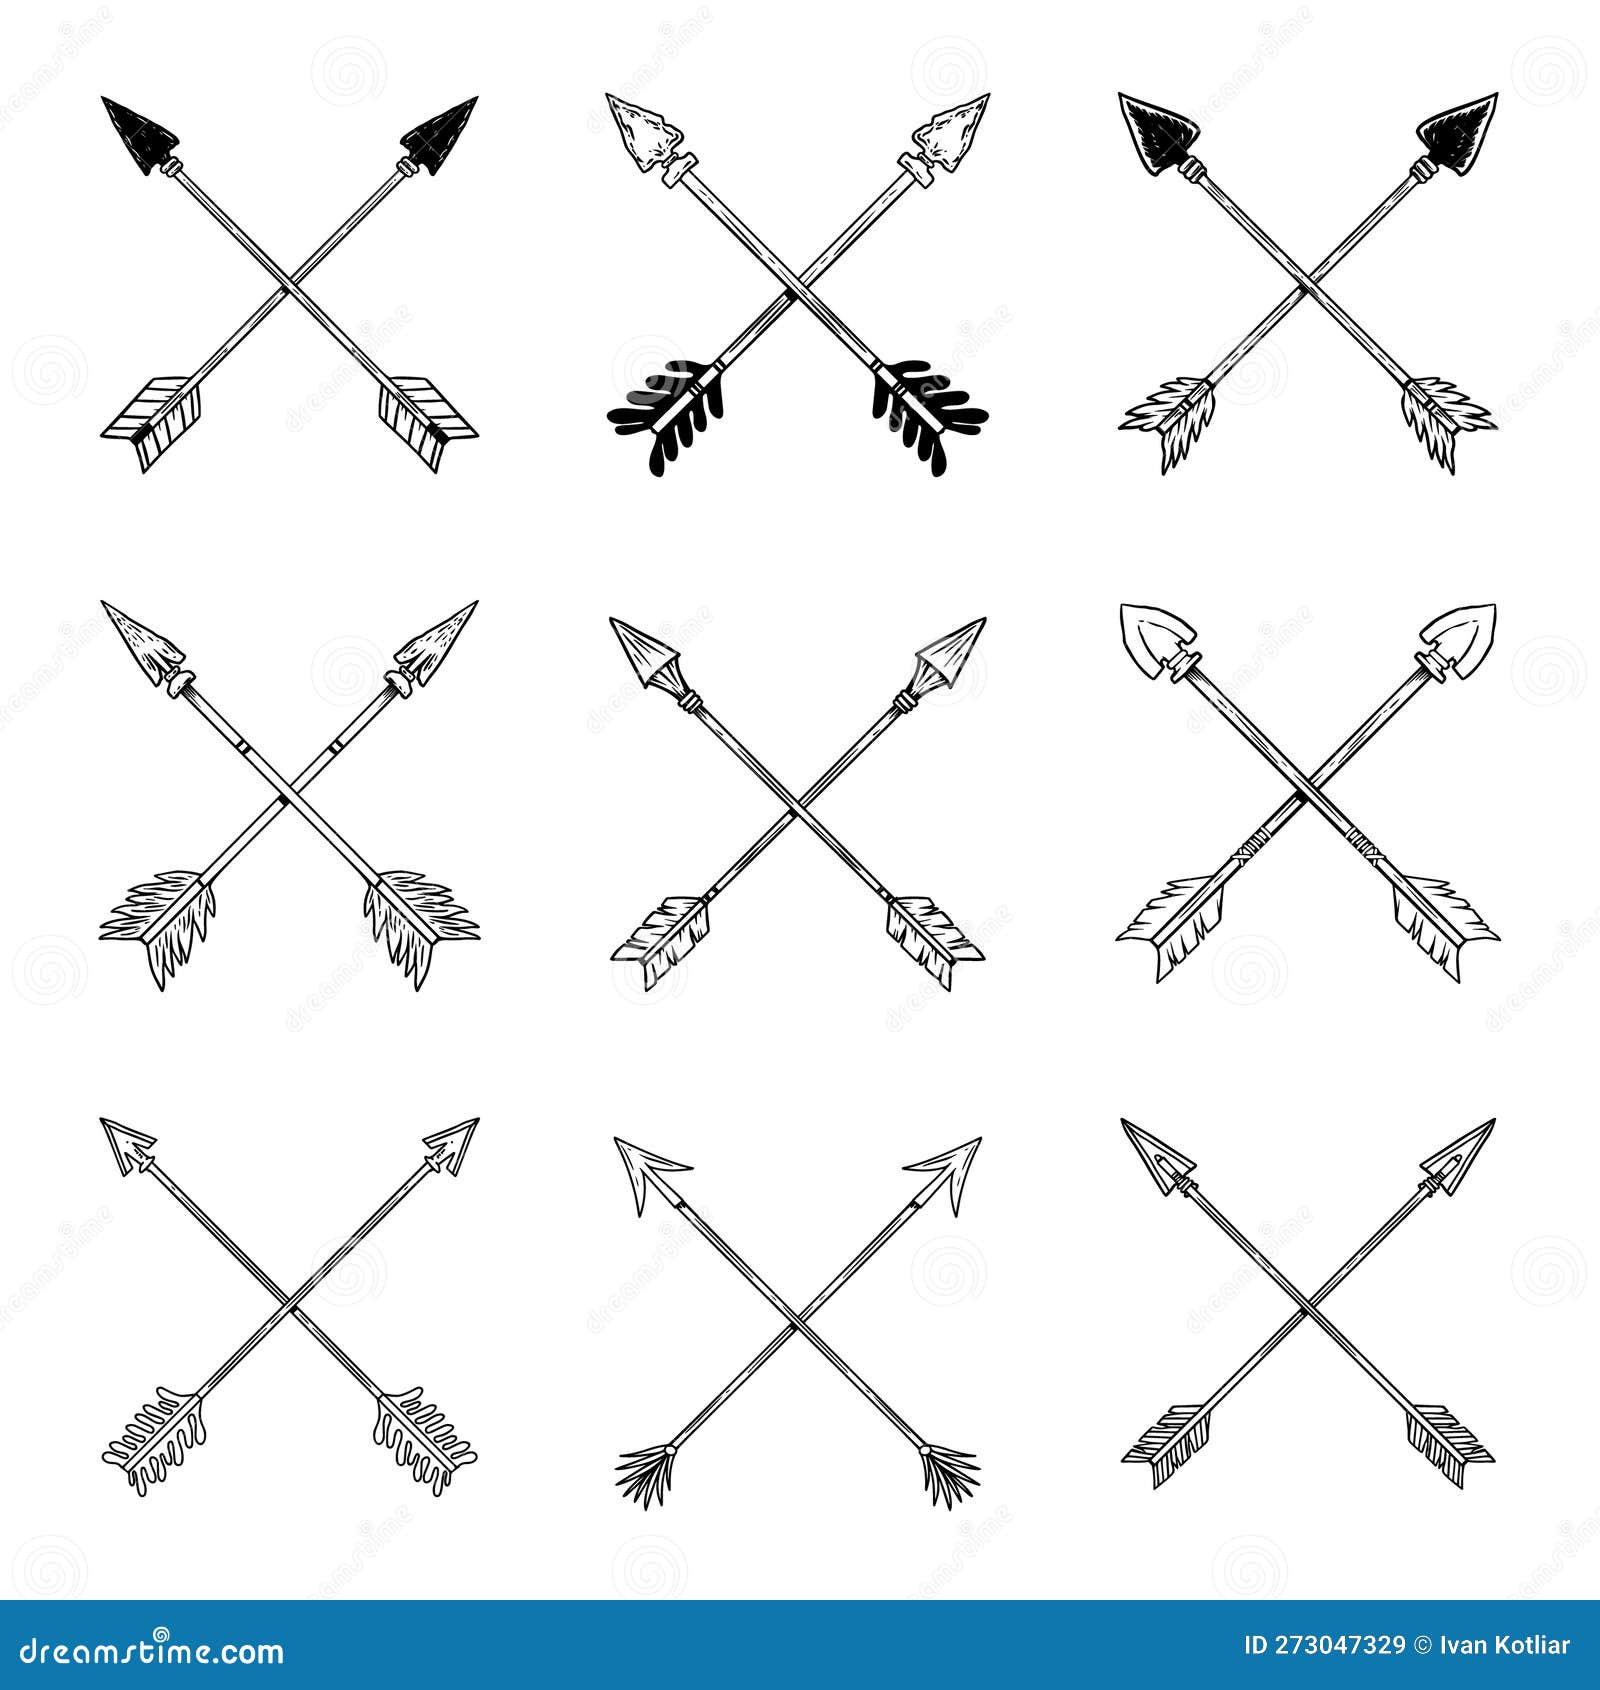 Illustration of Crossed Ancient Arrows. Design Element for Poster, Card ...